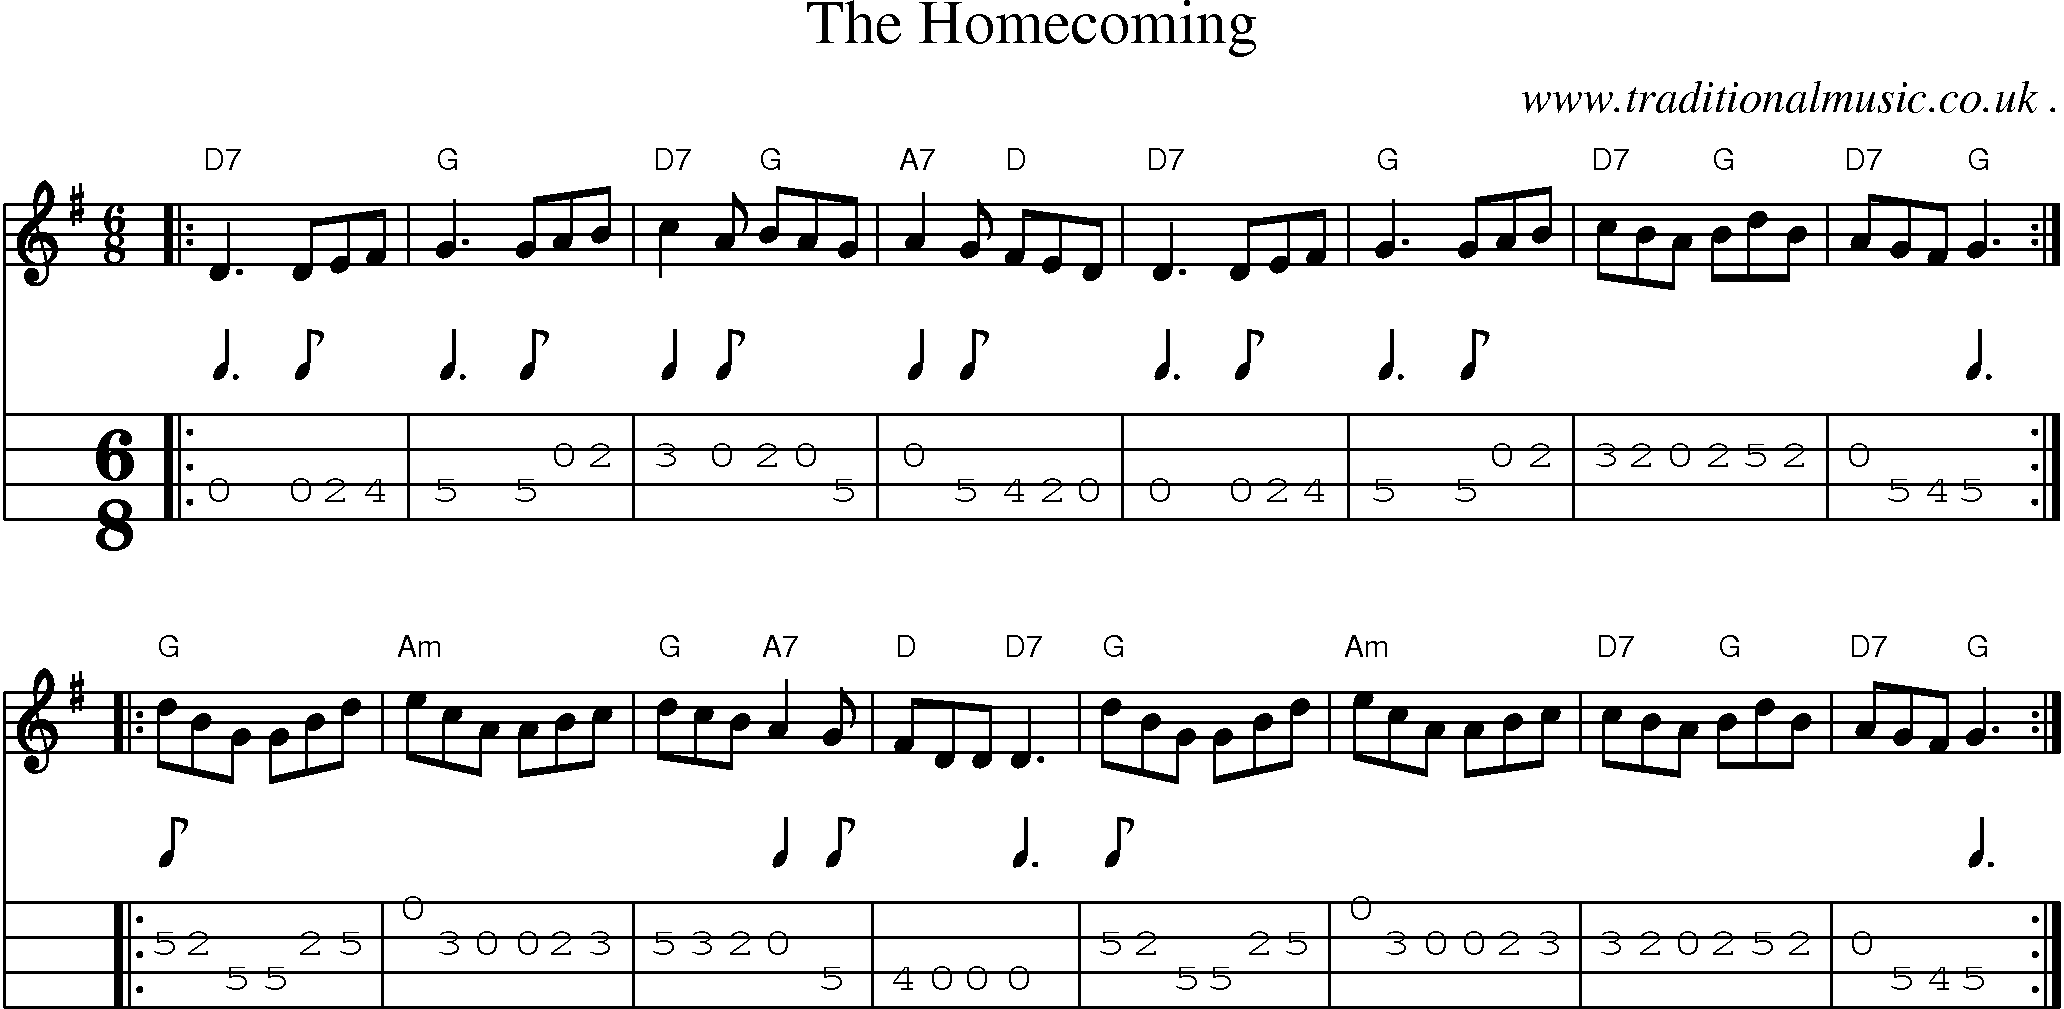 Sheet-music  score, Chords and Mandolin Tabs for The Homecoming